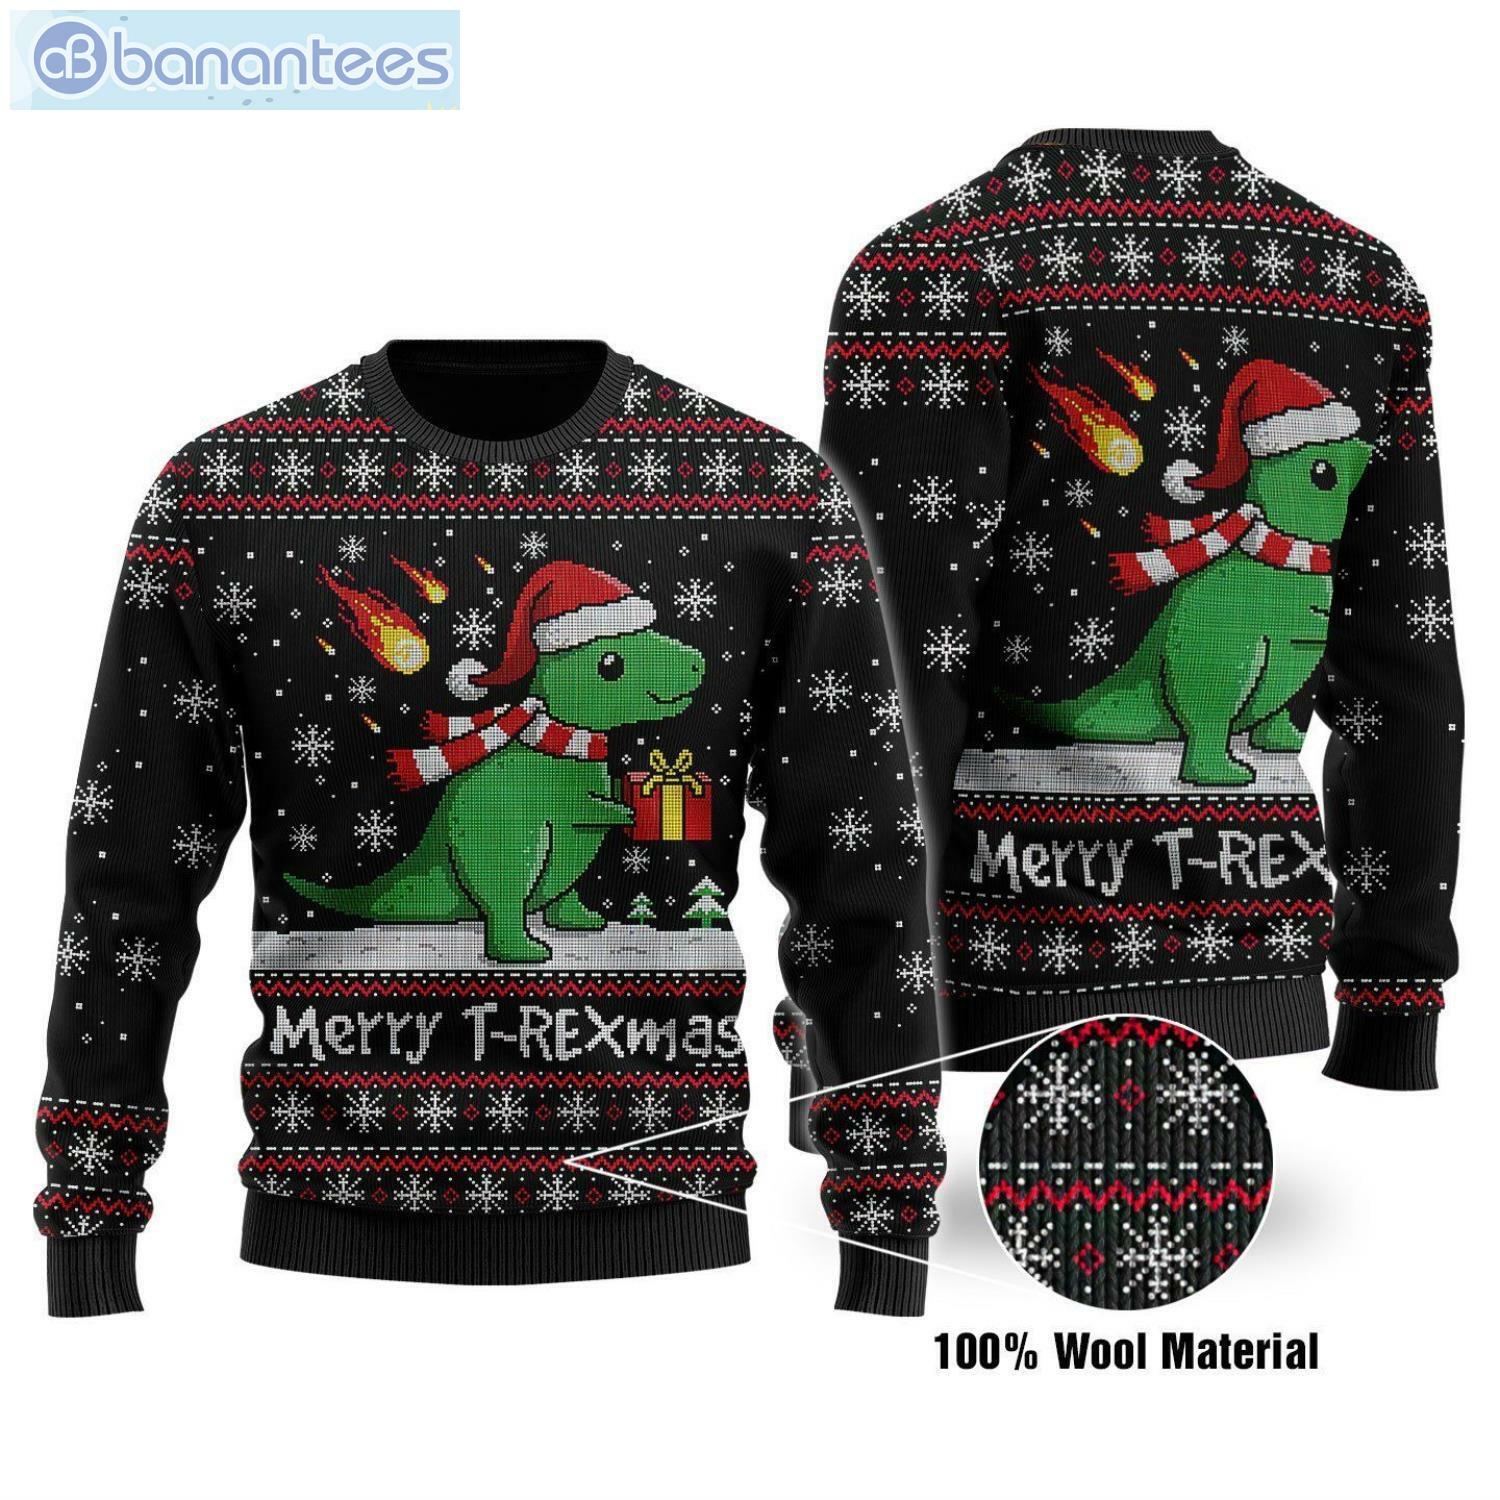 Merry T-Rexmas Christmas Ugly Sweater Product Photo 1 Product photo 1